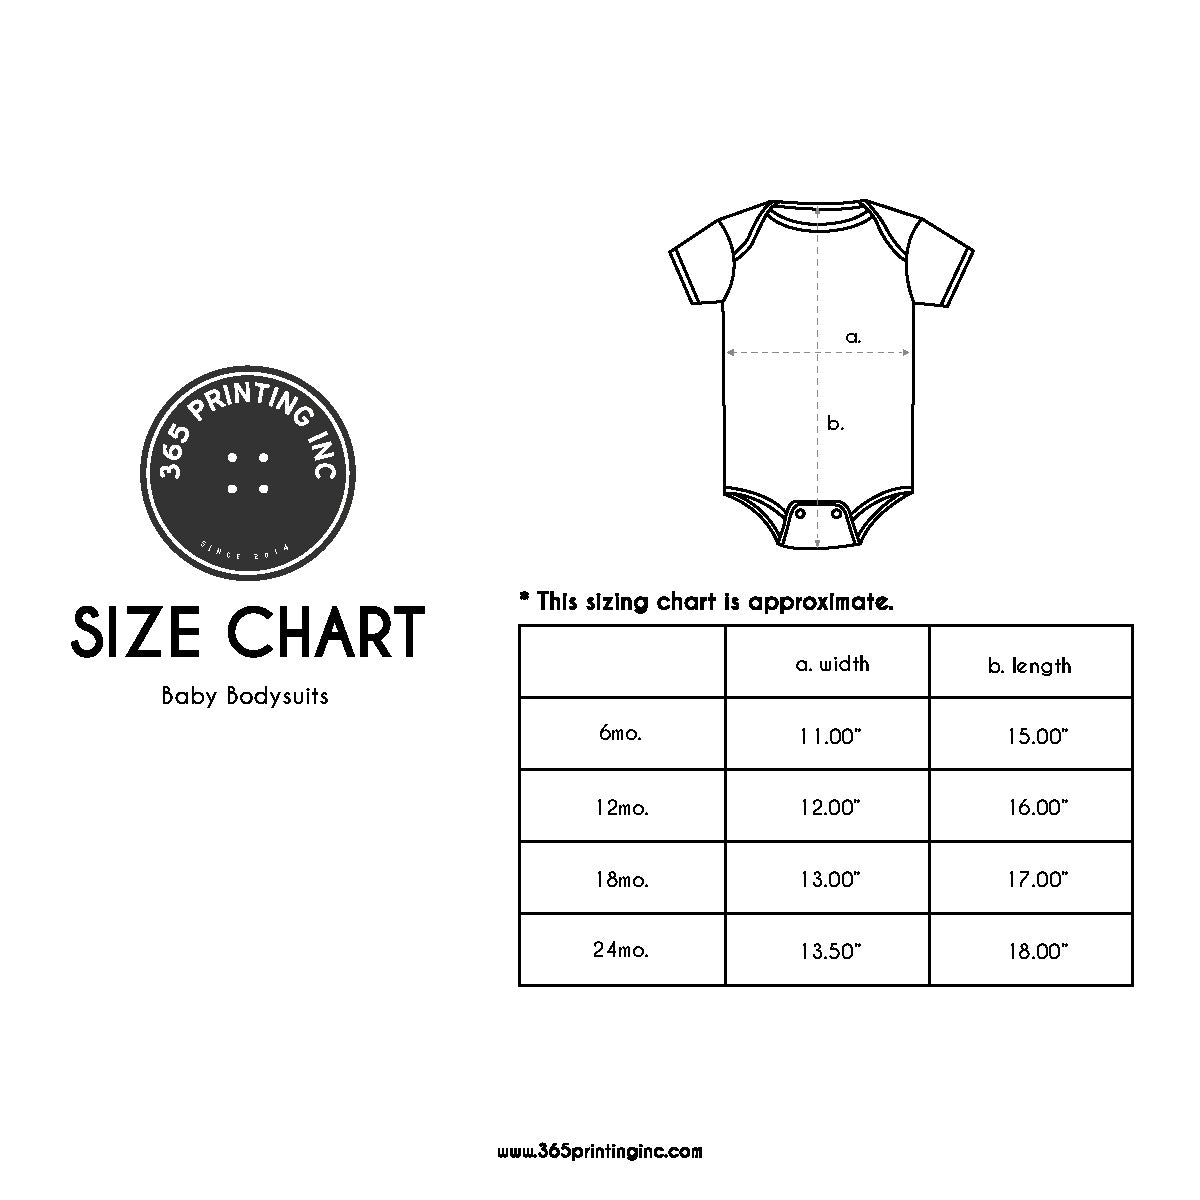 Funny Lion And Cub Matching Dad Shirt And Baby Bodysuit - 365 In Love